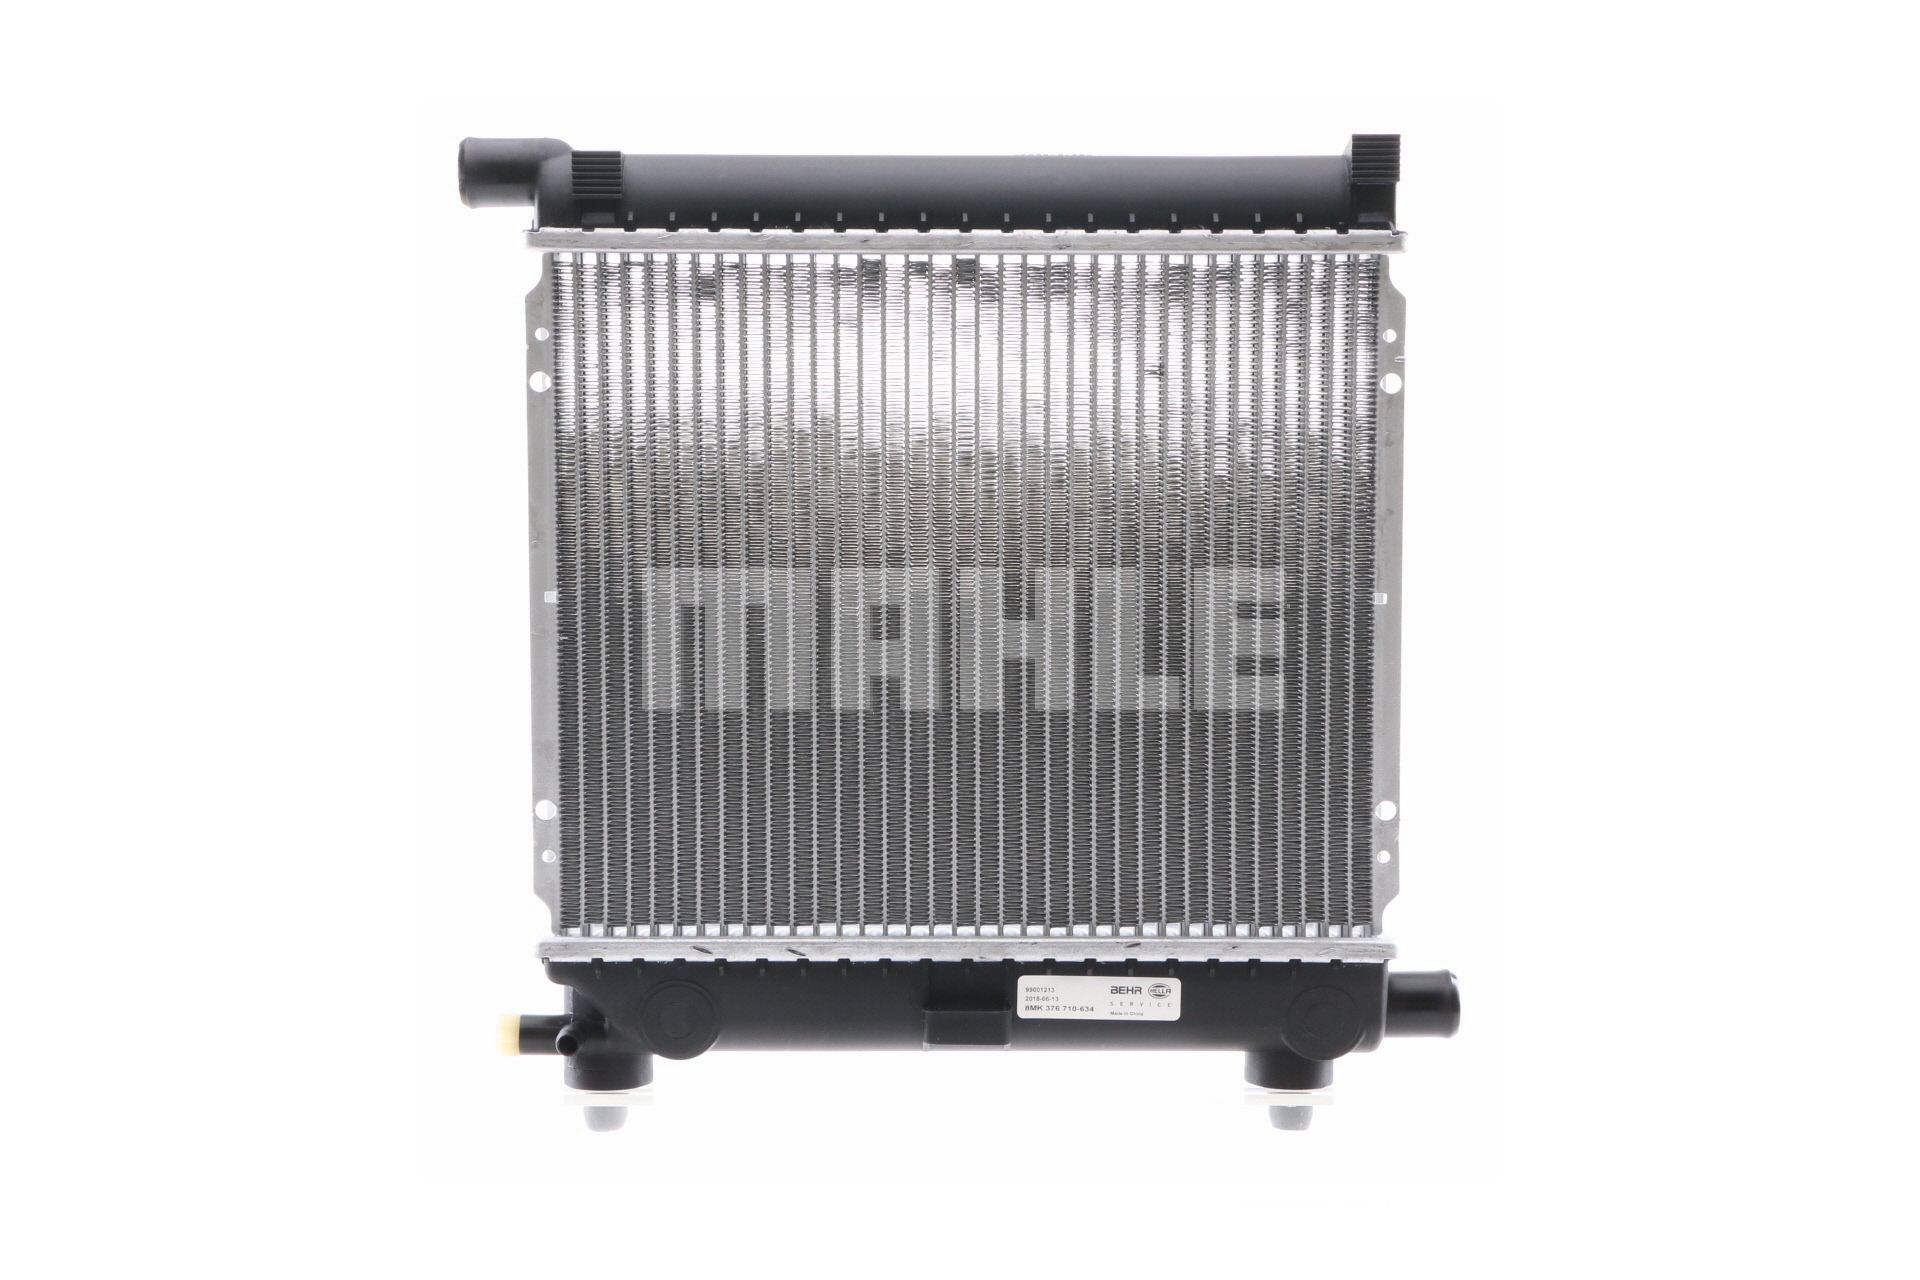 MAHLE ORIGINAL CR 235 000S Engine radiator for vehicles without air conditioning, 292 x 348 x 42 mm, Manual Transmission, Brazed cooling fins